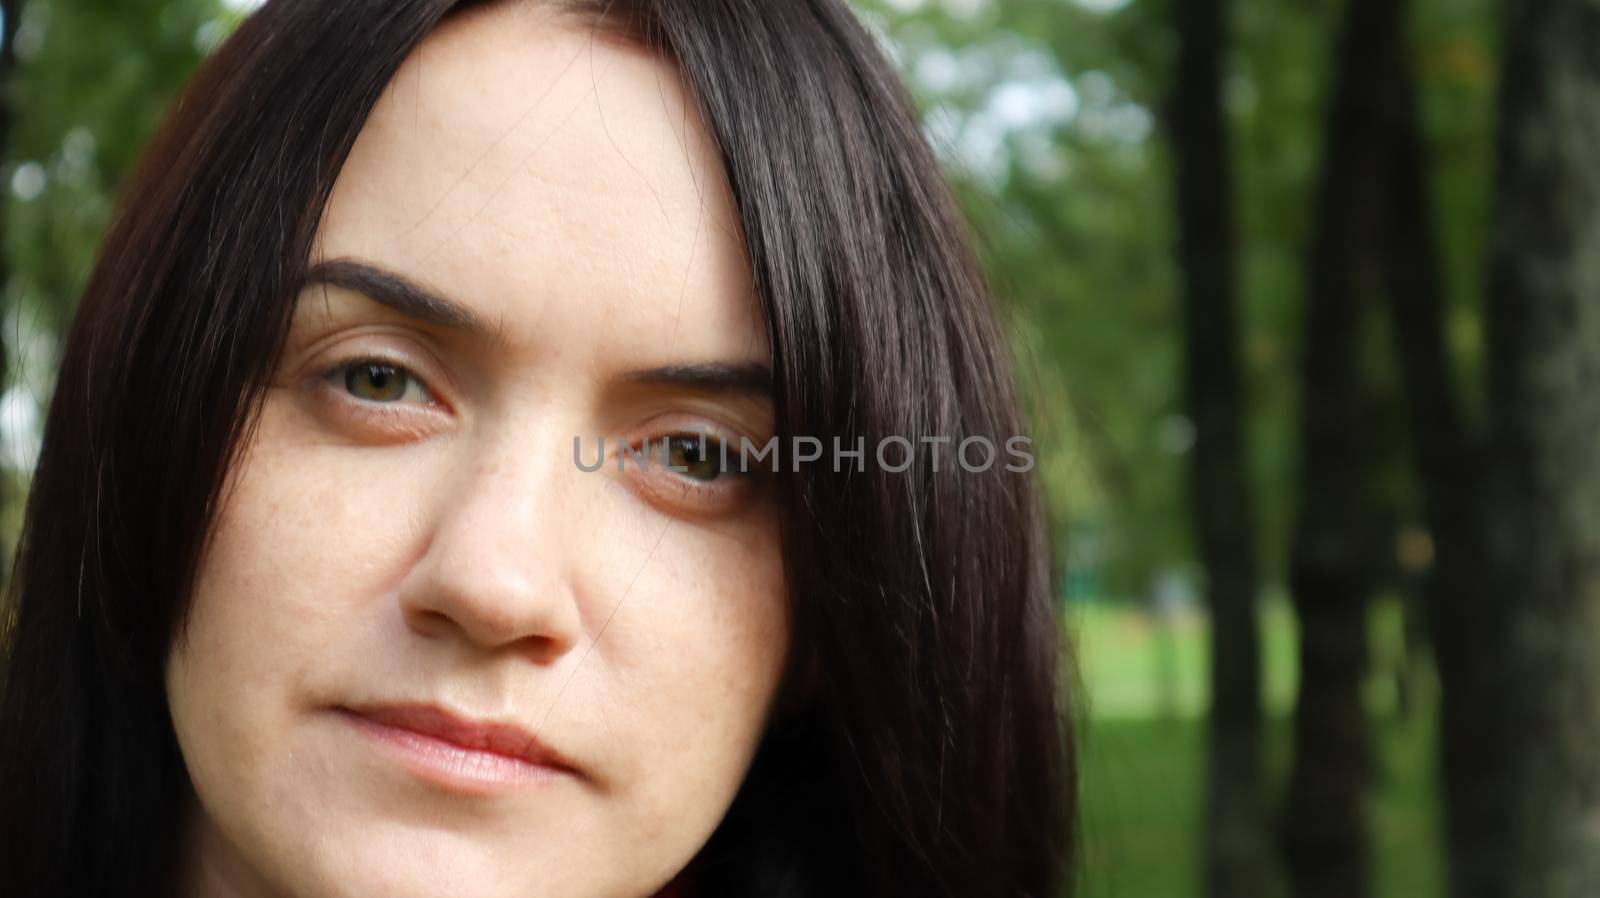 Close up portrait of beautiful caucasian woman while walking outdoors in city park with blurred background. A woman is looking at the camera on a sunny day